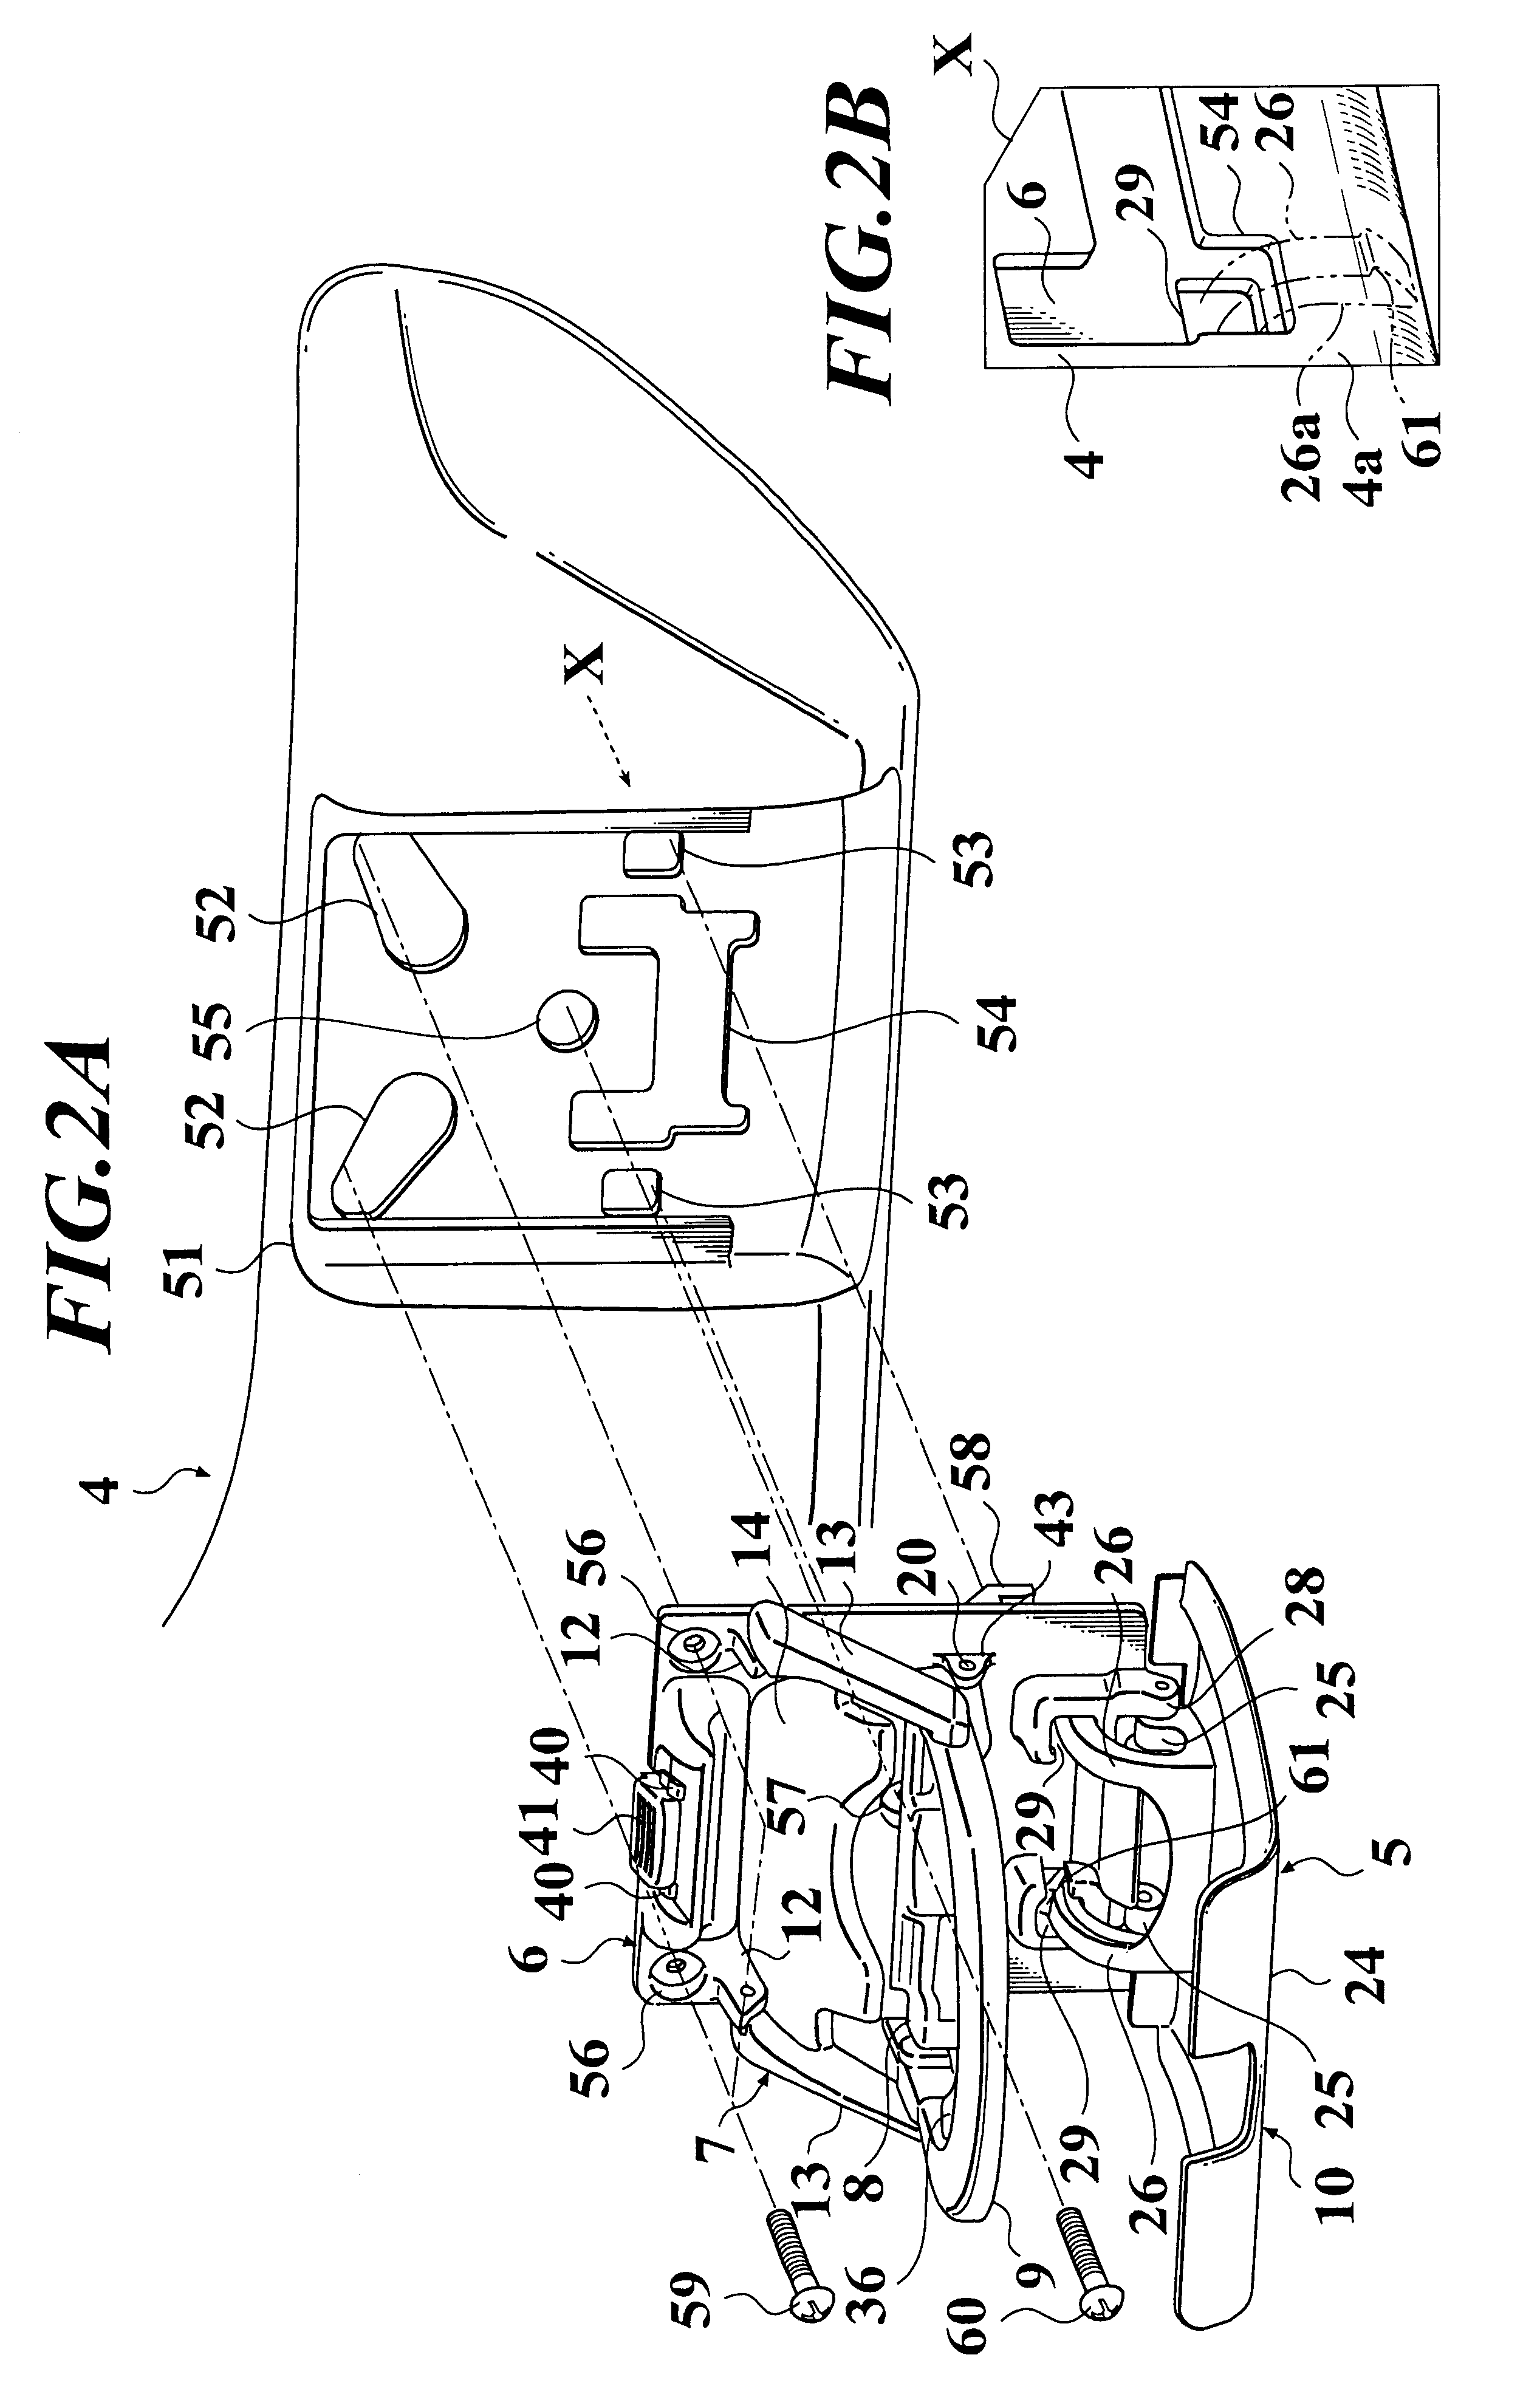 Vehicle seat having container holder and container holder